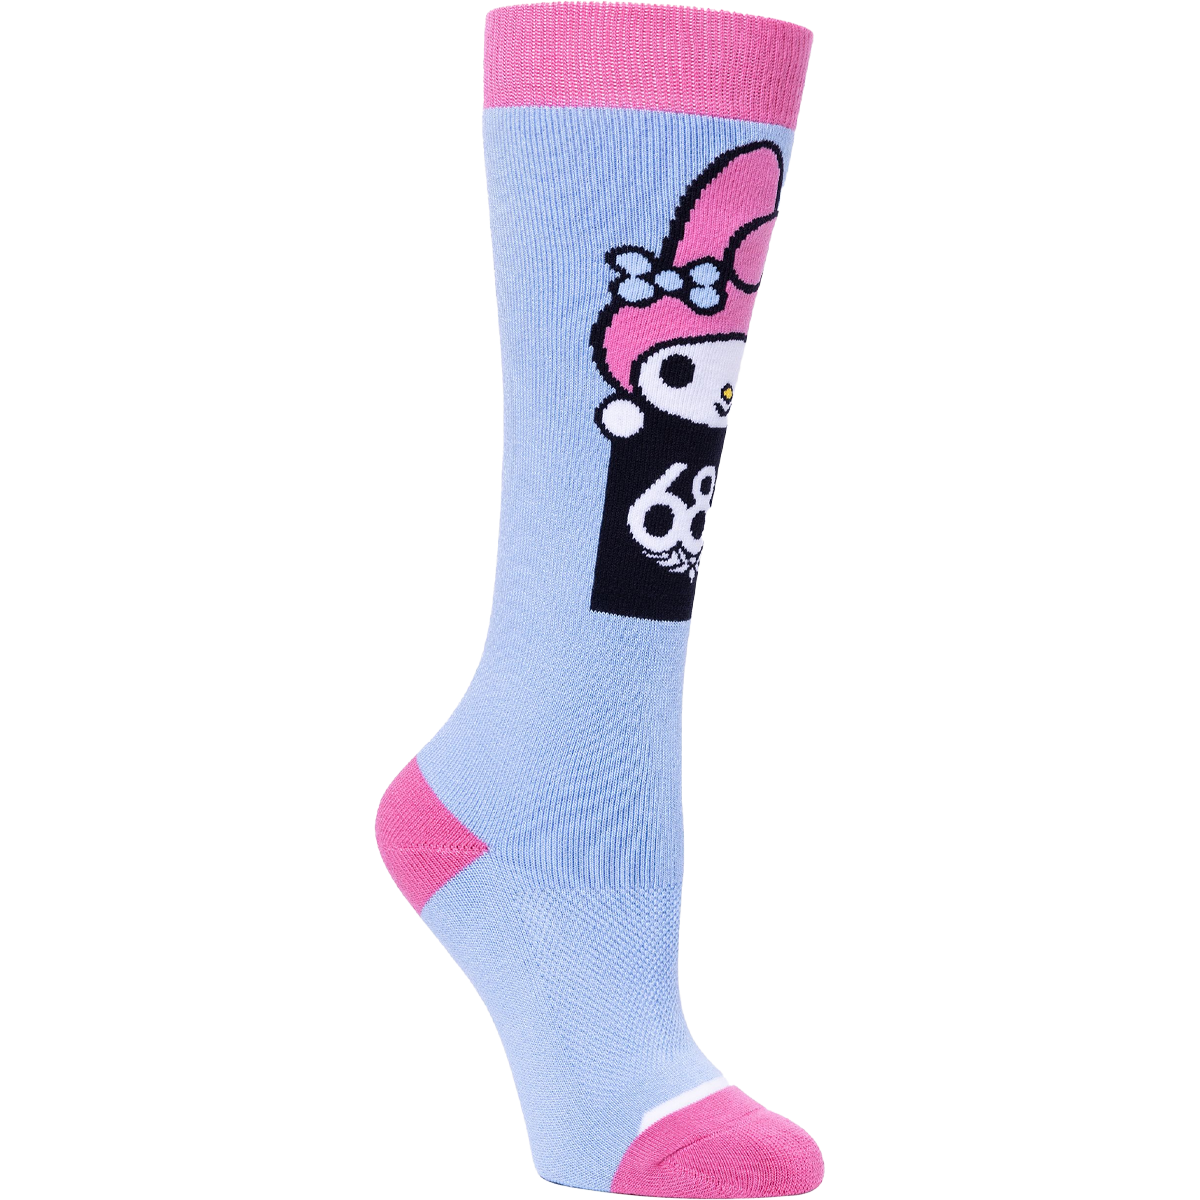 Women's Hello Kitty and Friends Sock (3-pack) alternate view